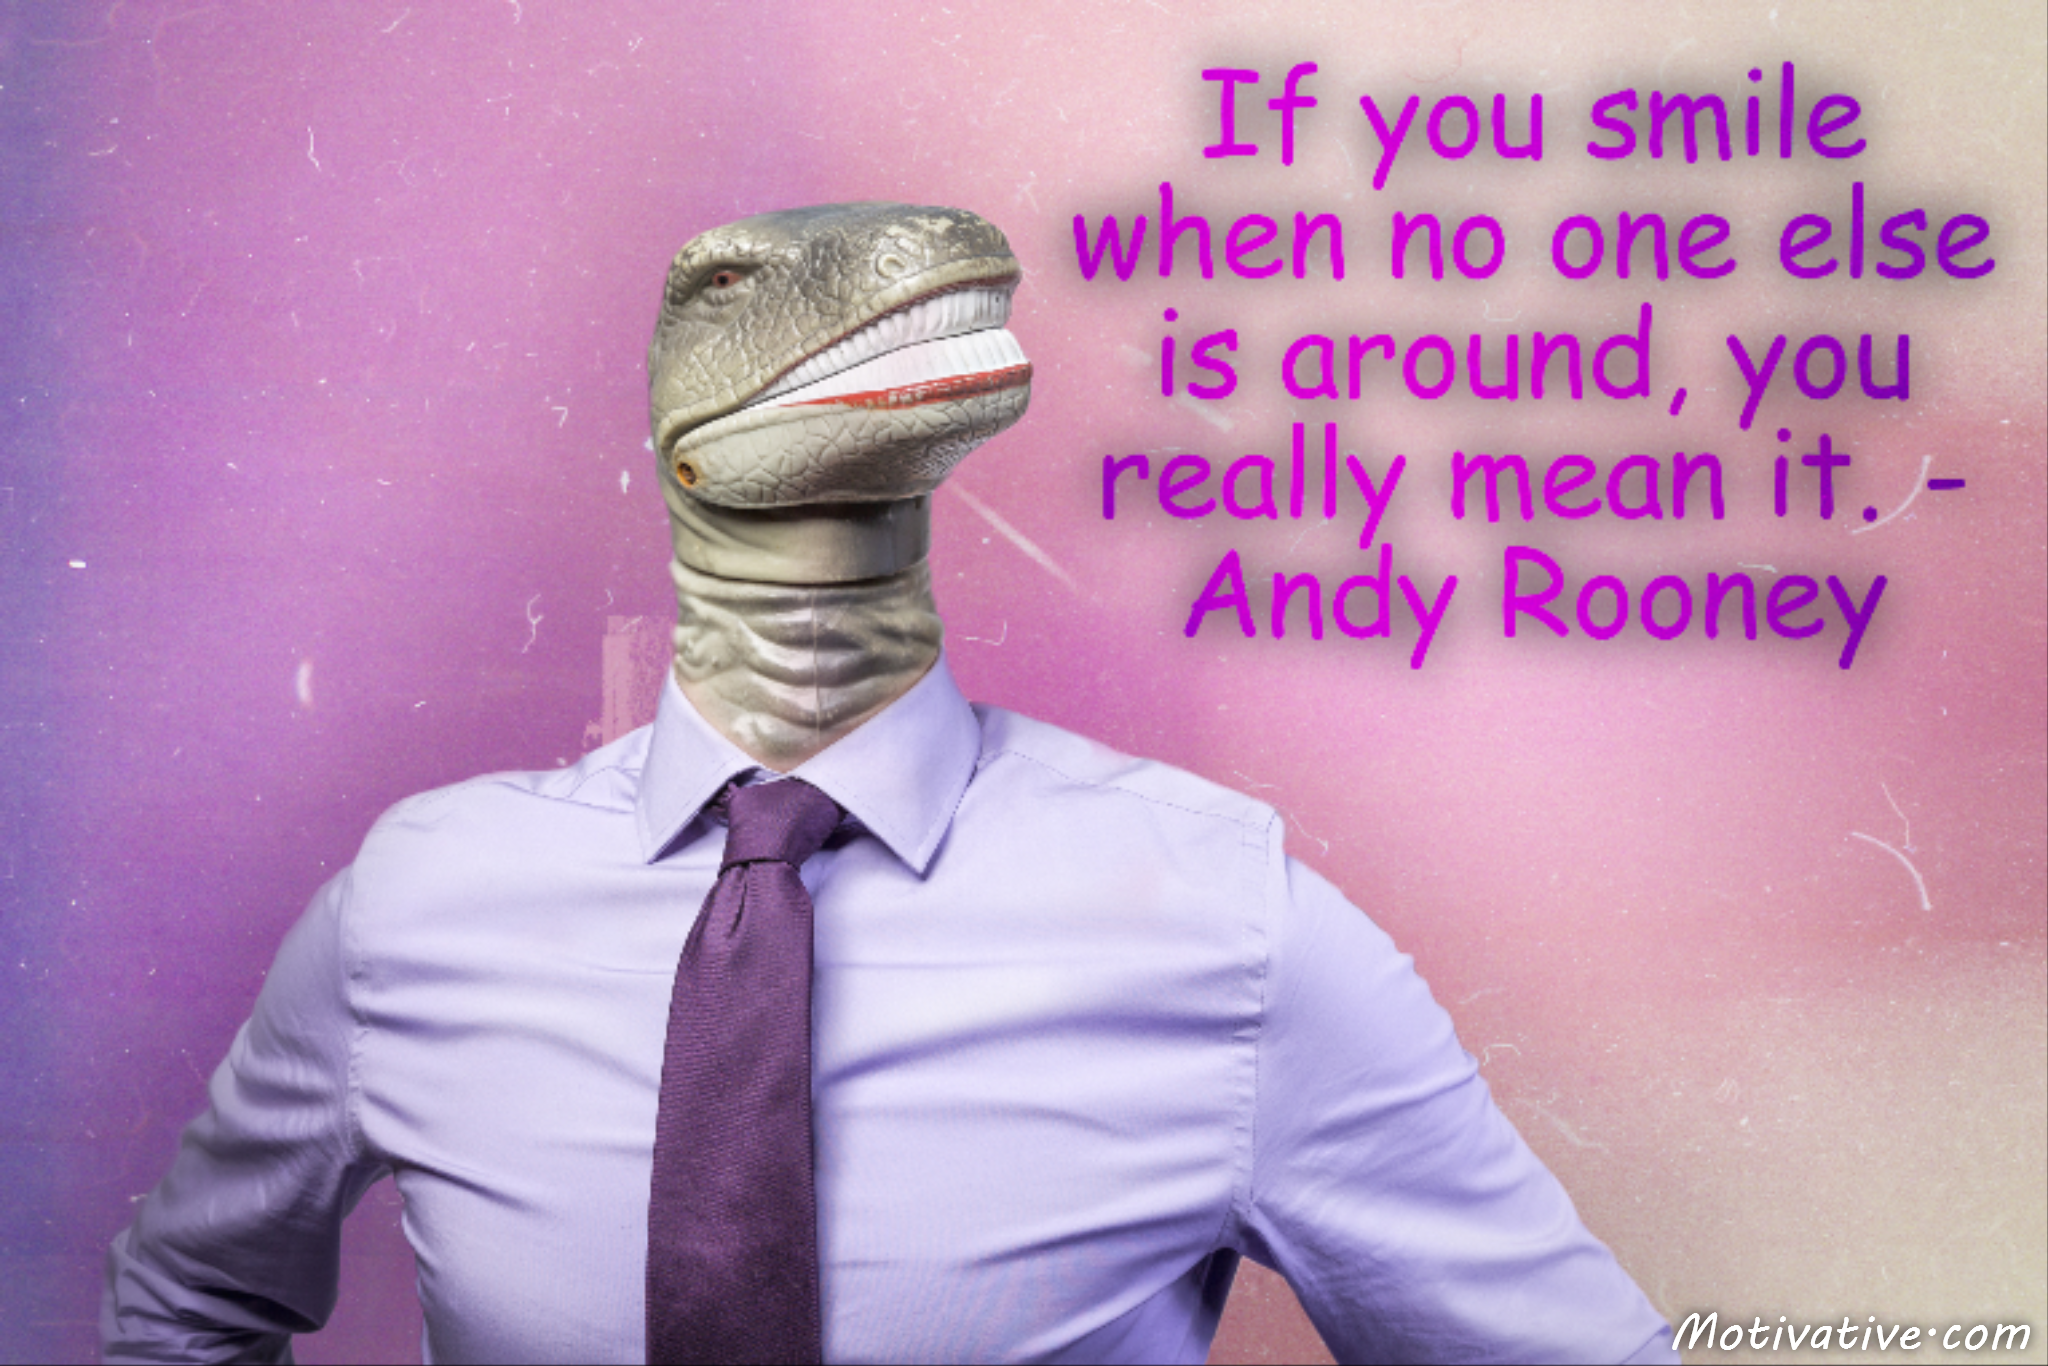 If you smile when no one else is around, you really mean it. – Andy Rooney